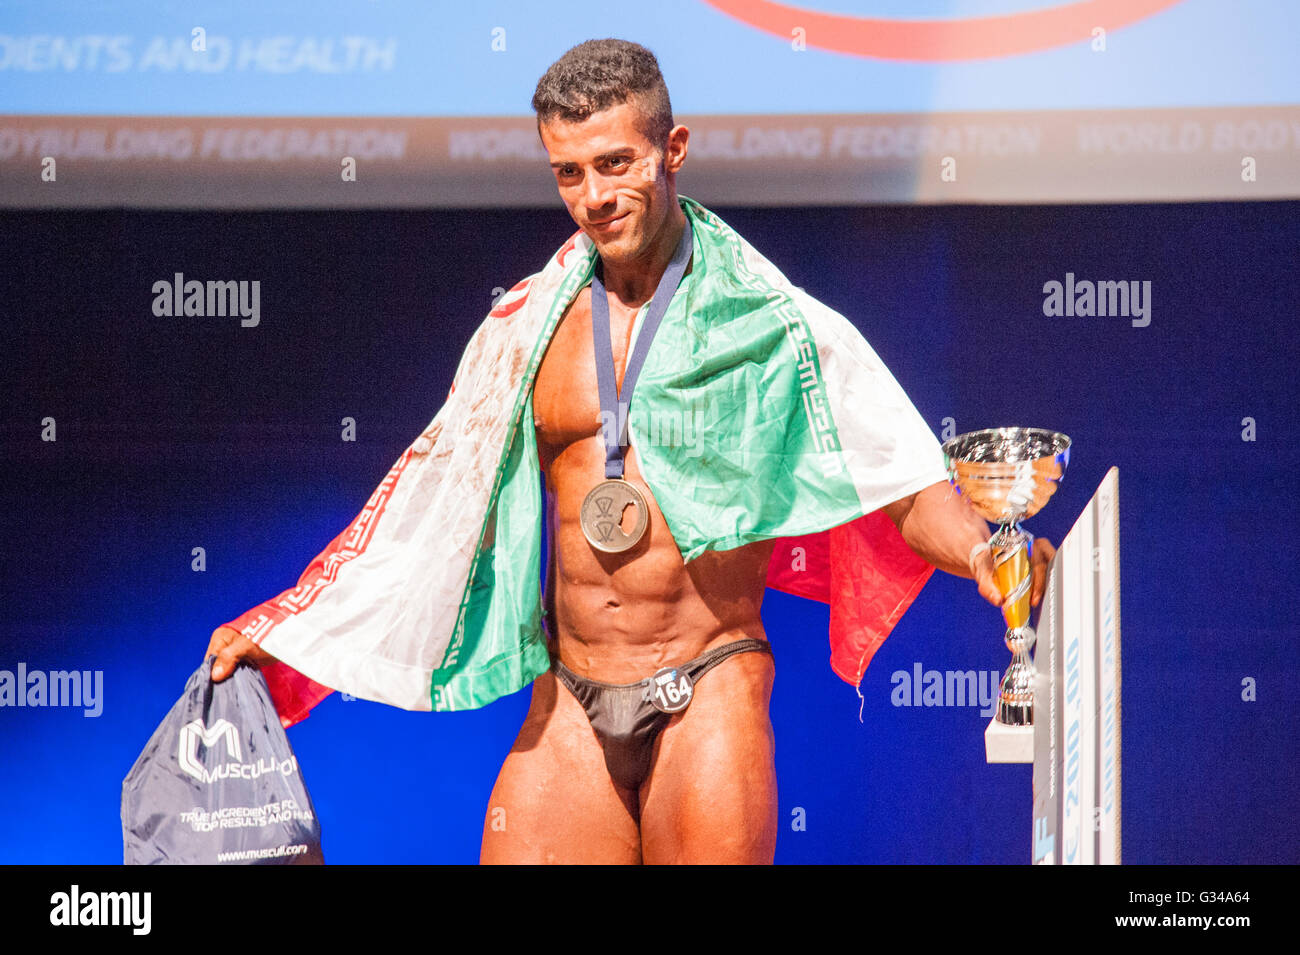 MAASTRICHT, THE NETHERLANDS - OCTOBER 25, 2015: Male bodybuilder celebrates his victory on stage with his national flag of Iran Stock Photo